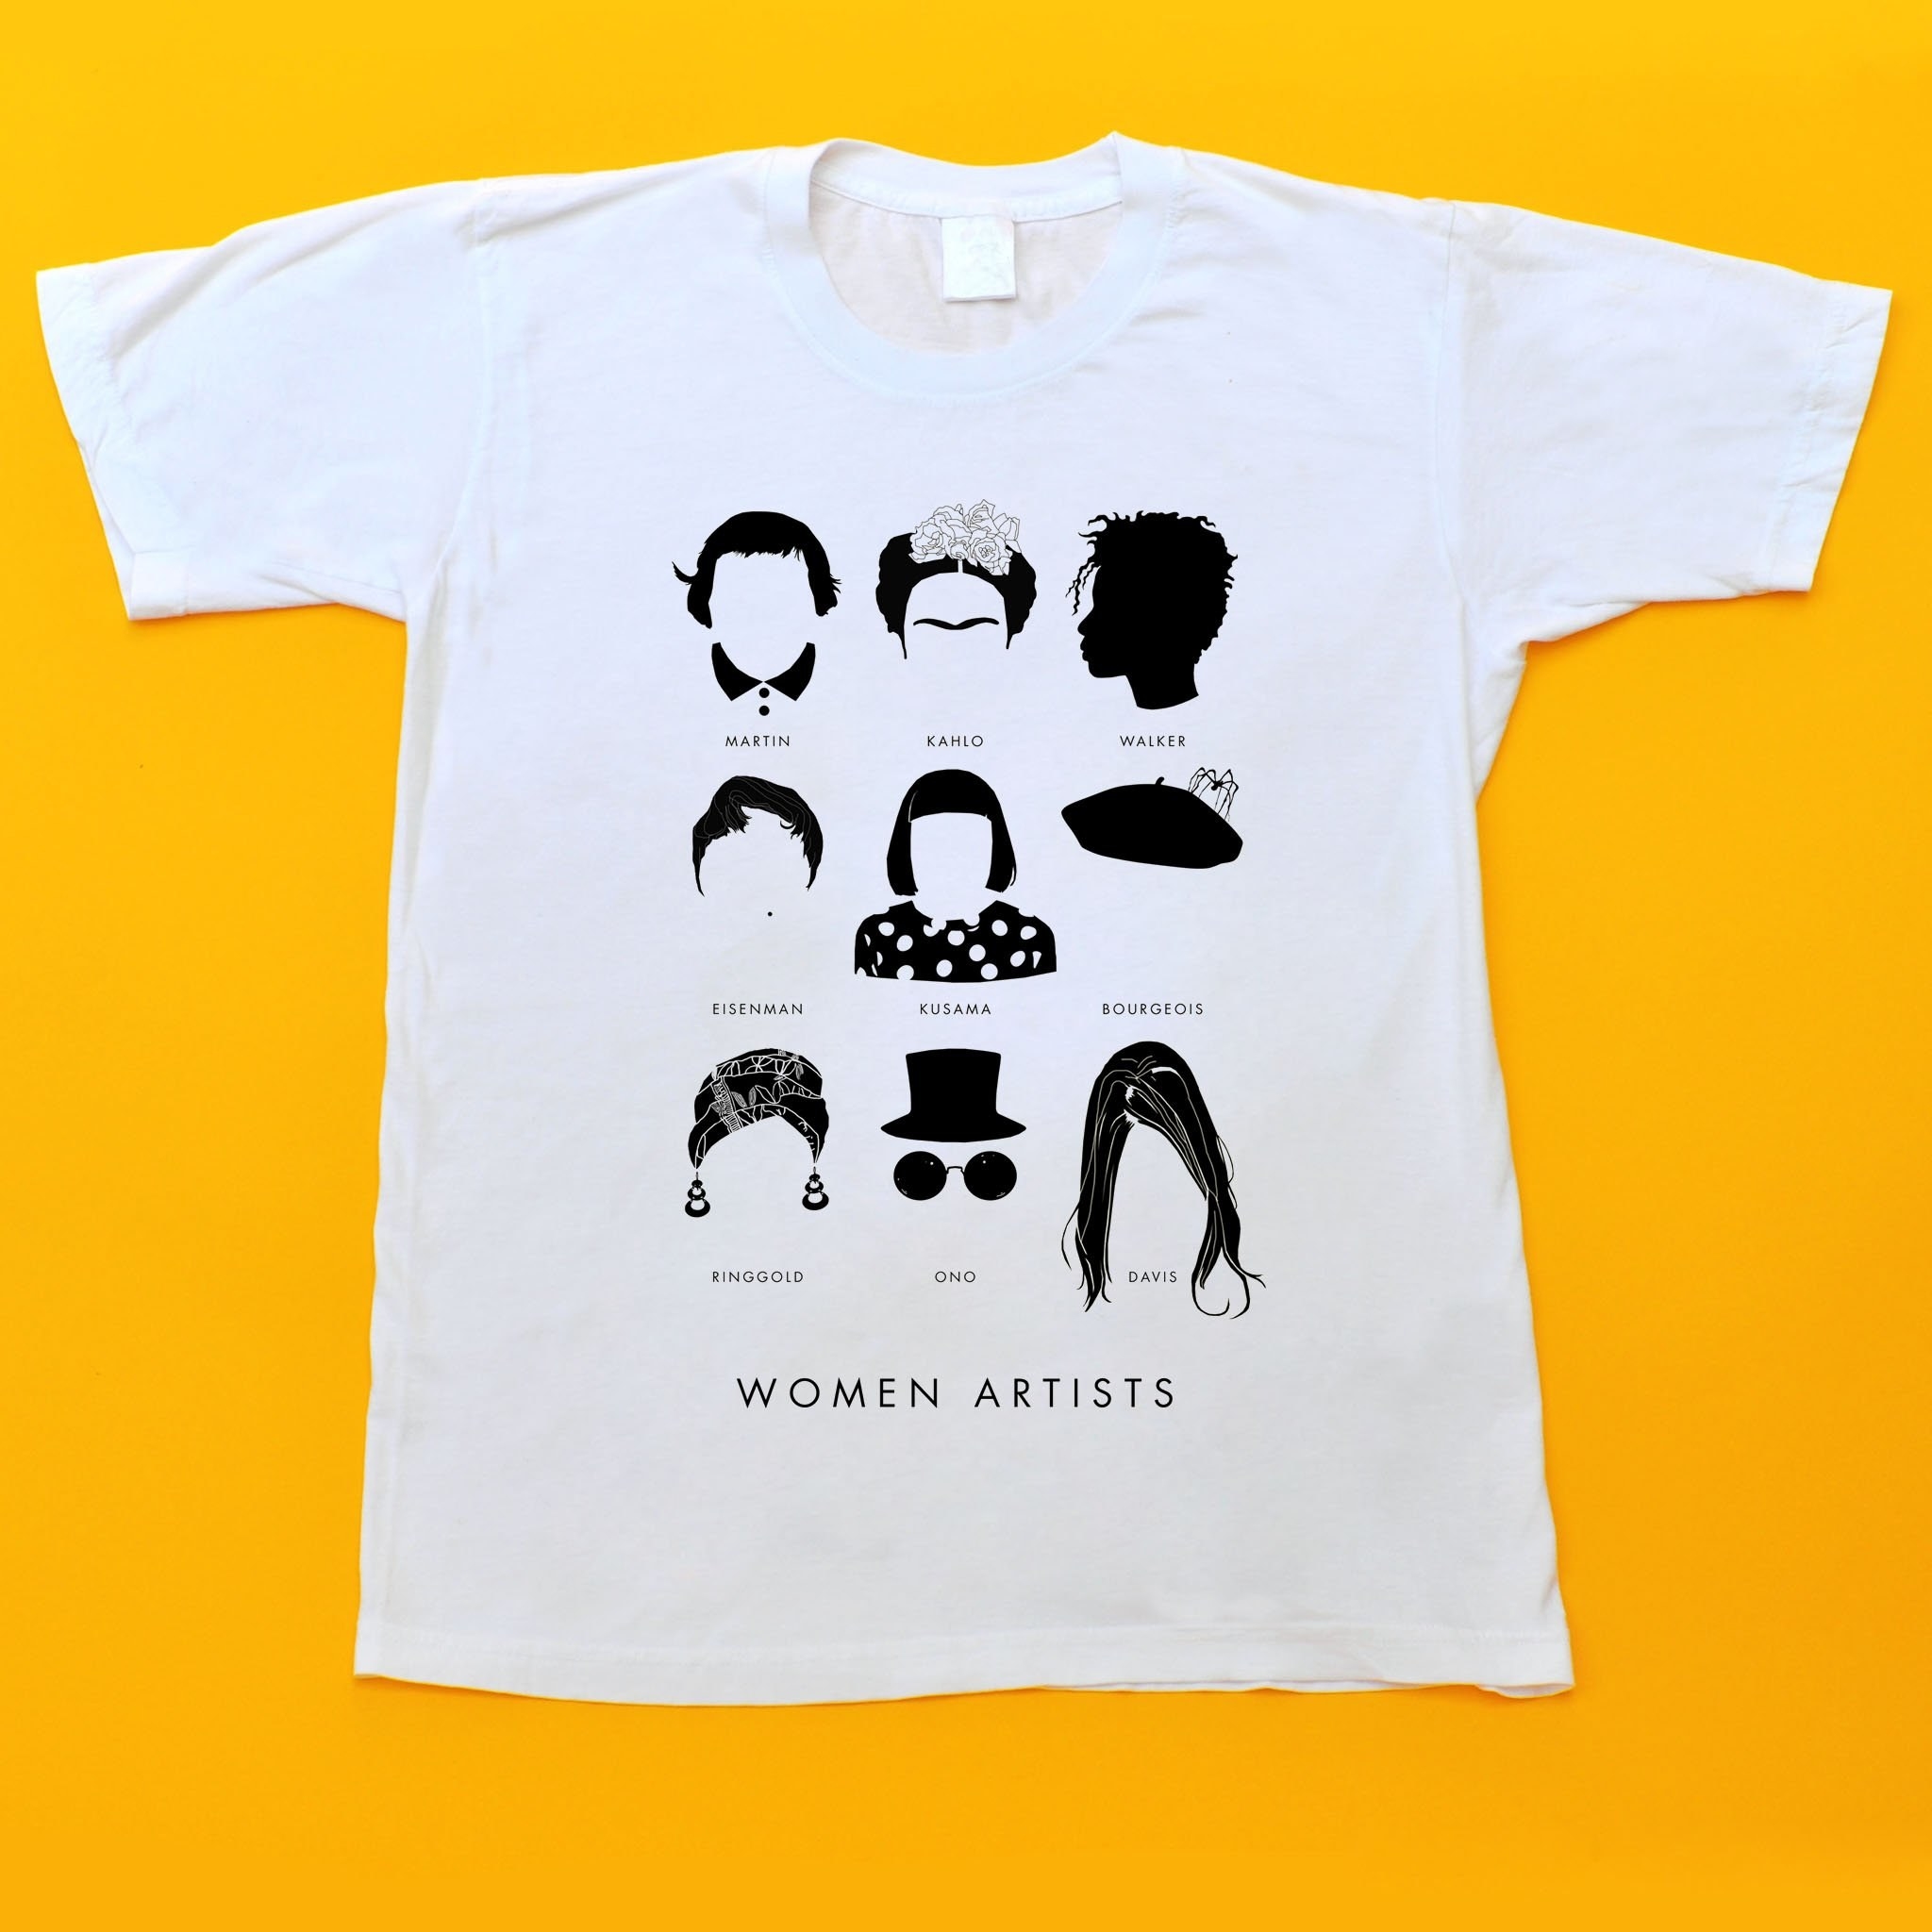 white t-shirt with hairstyles of famous women artists